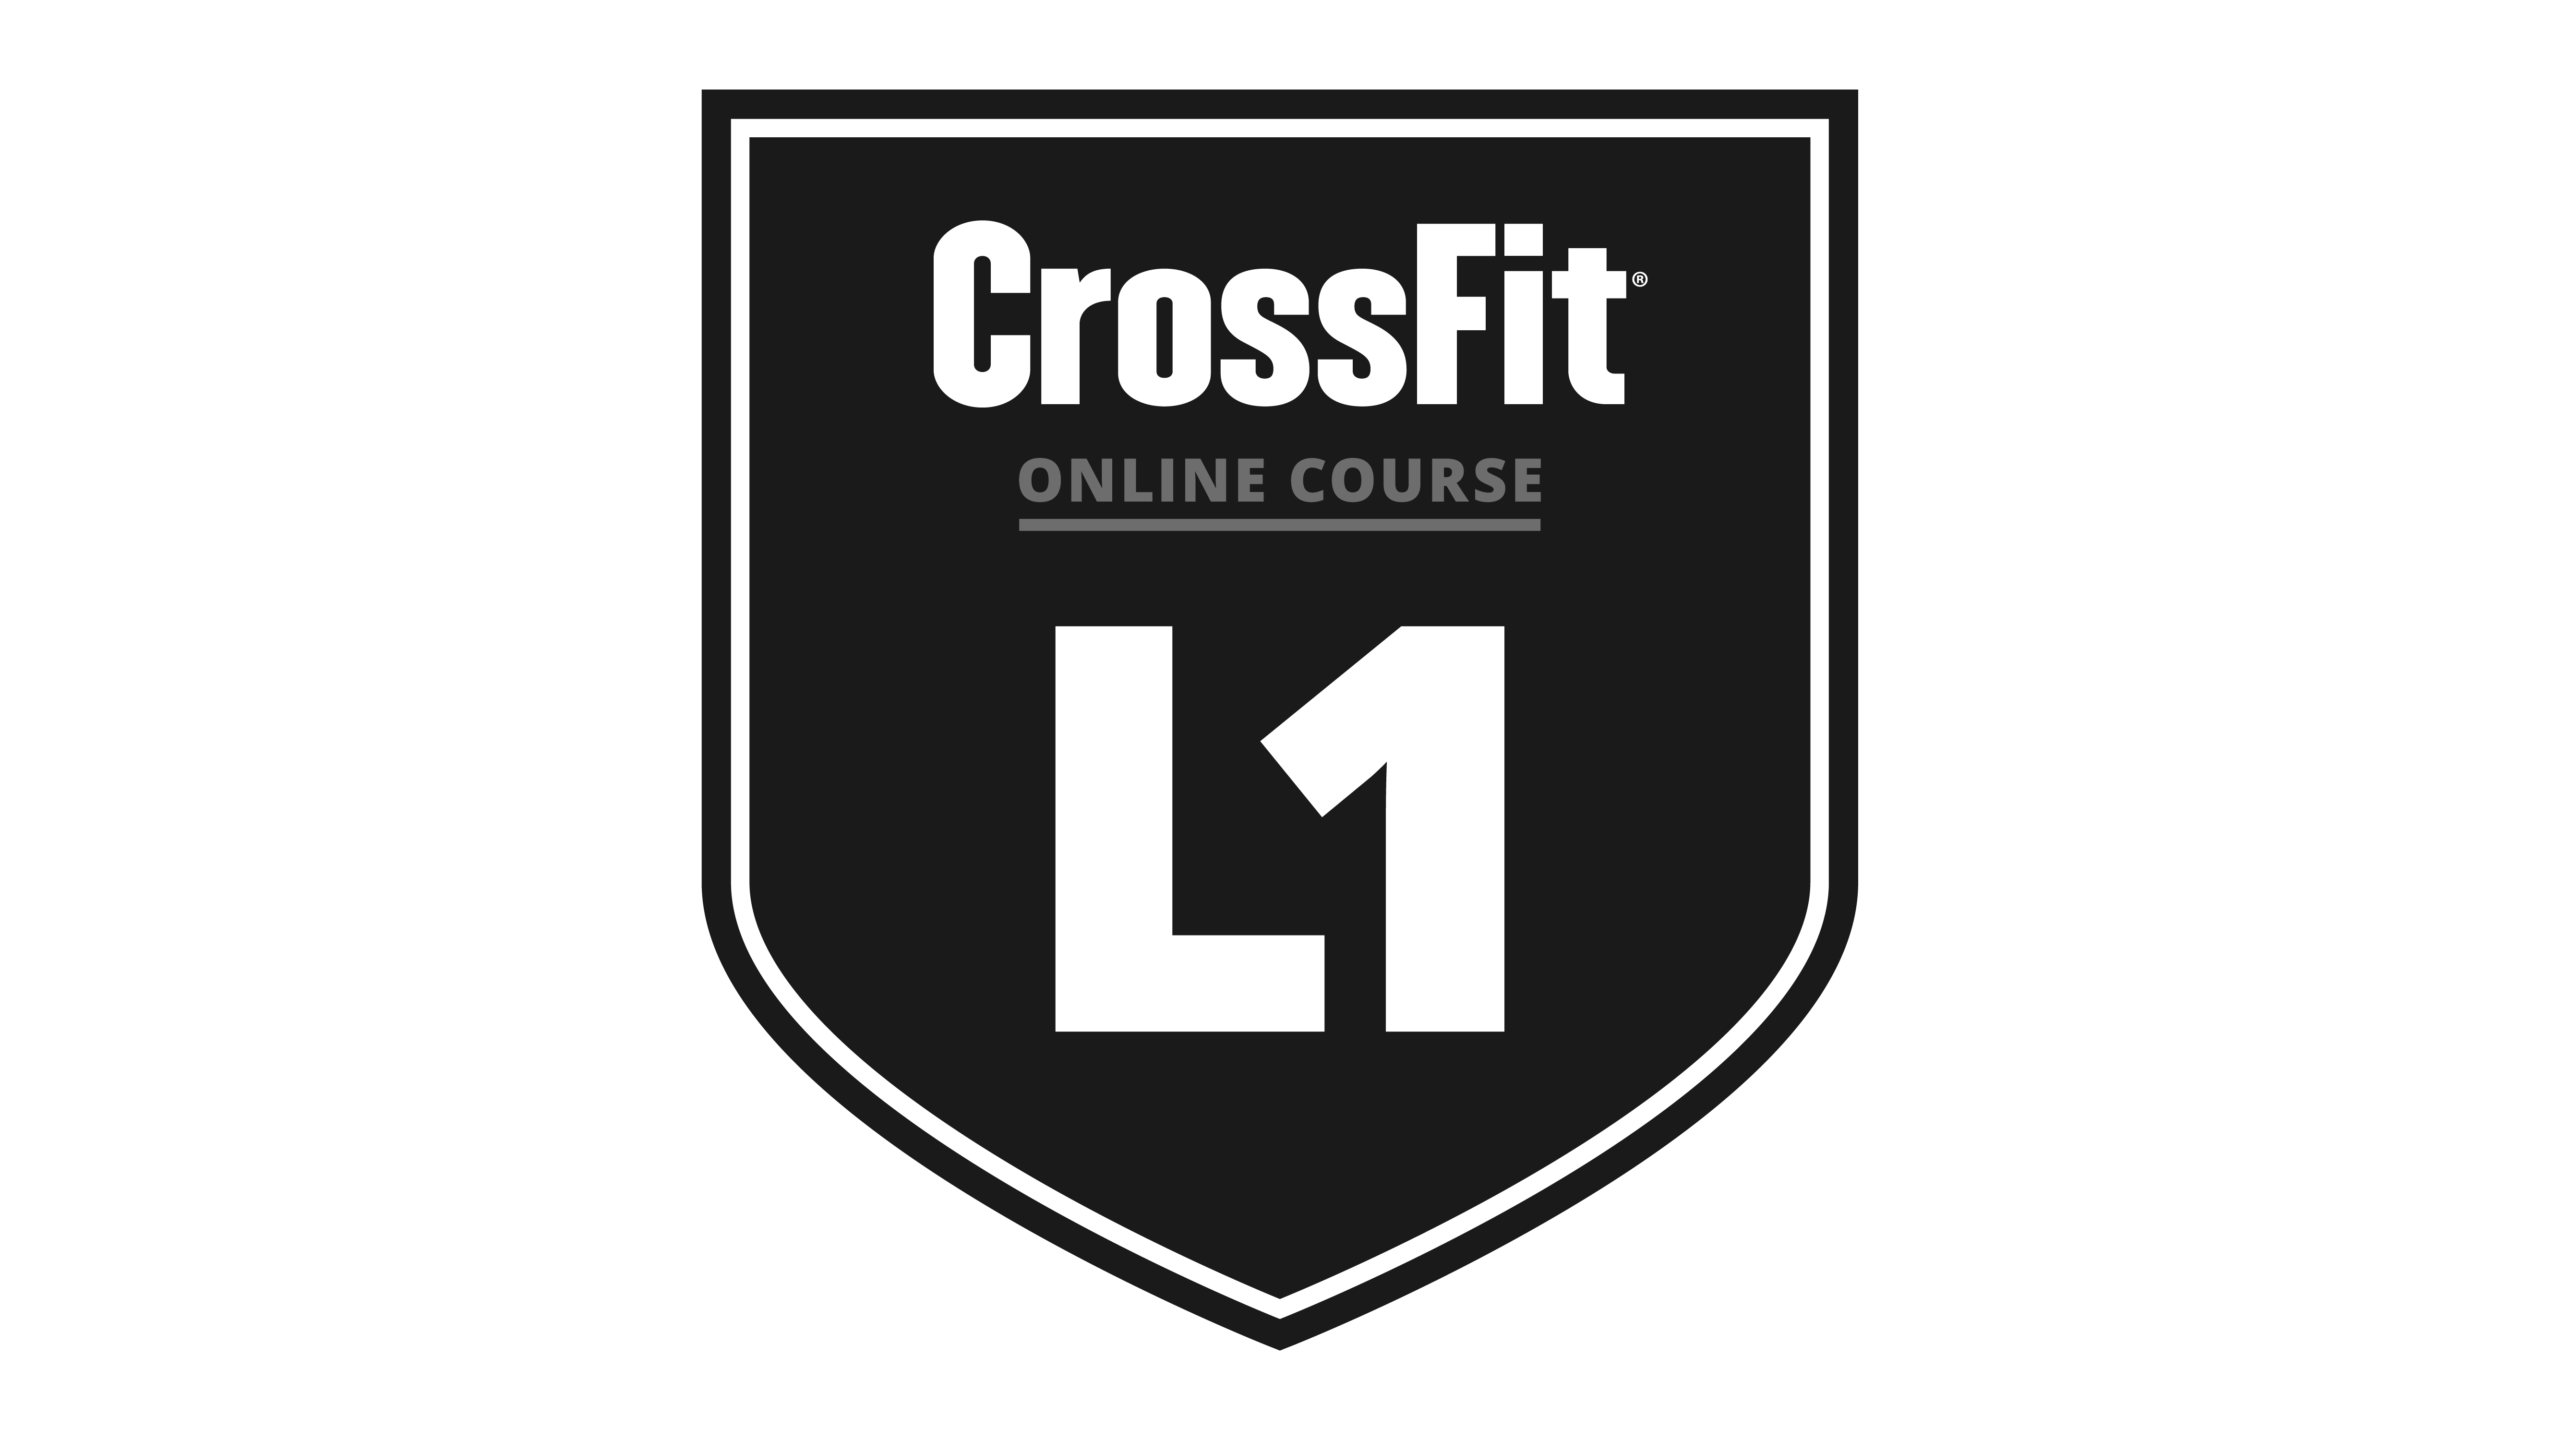 https://www.crossfit.com/wp-content/uploads/2020/04/08091524/CF_L1_OC_front-scaled.png